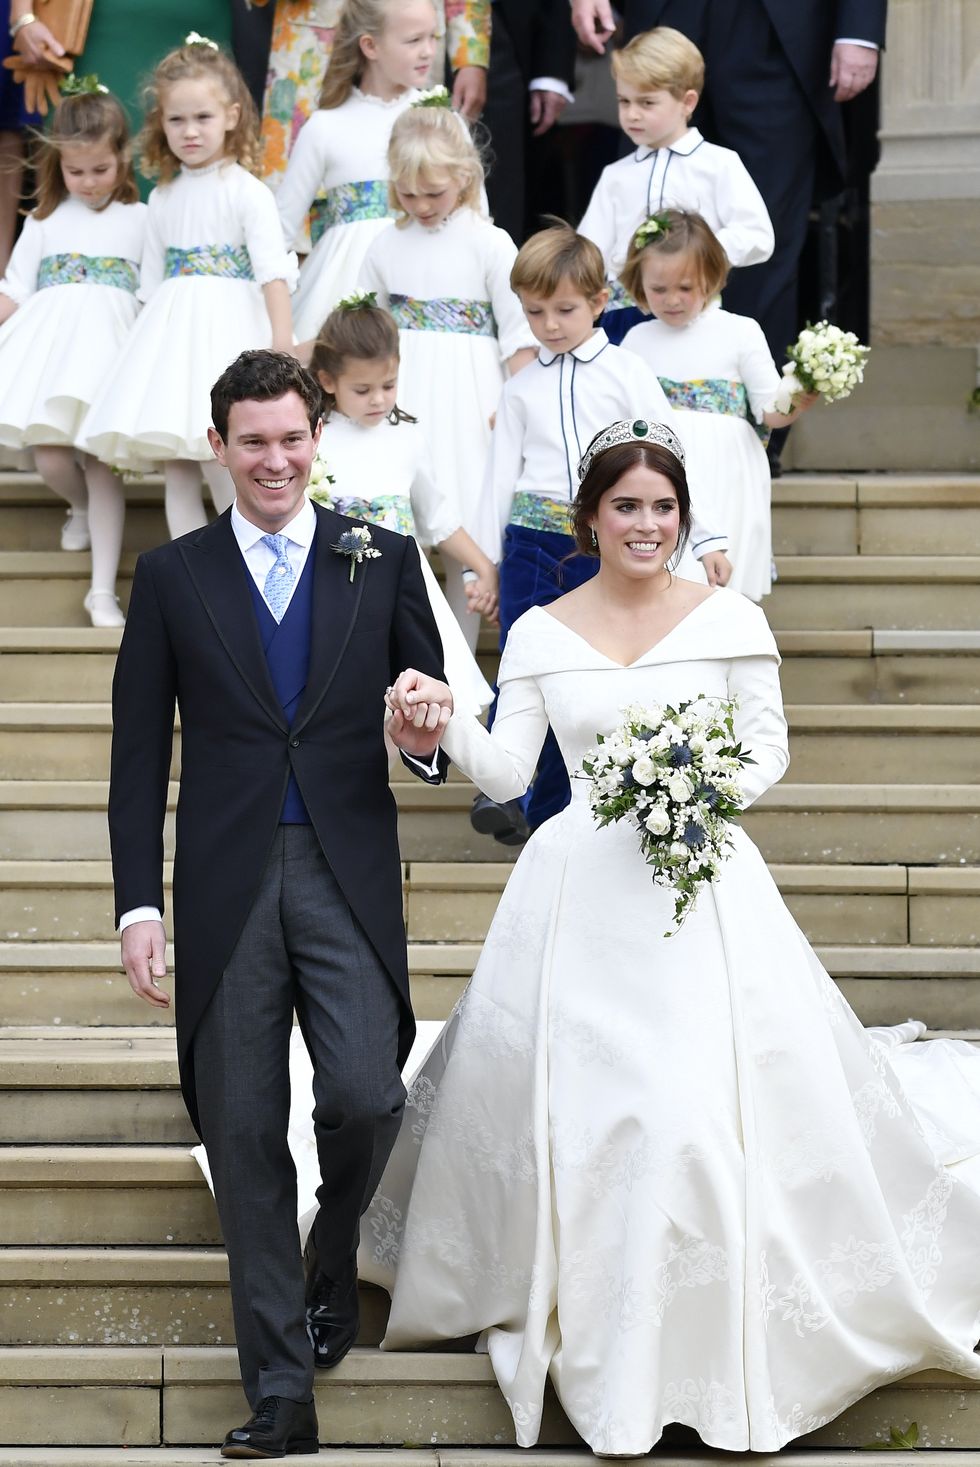 The 22 Best Celebrity Wedding Reception Dresses of All Time